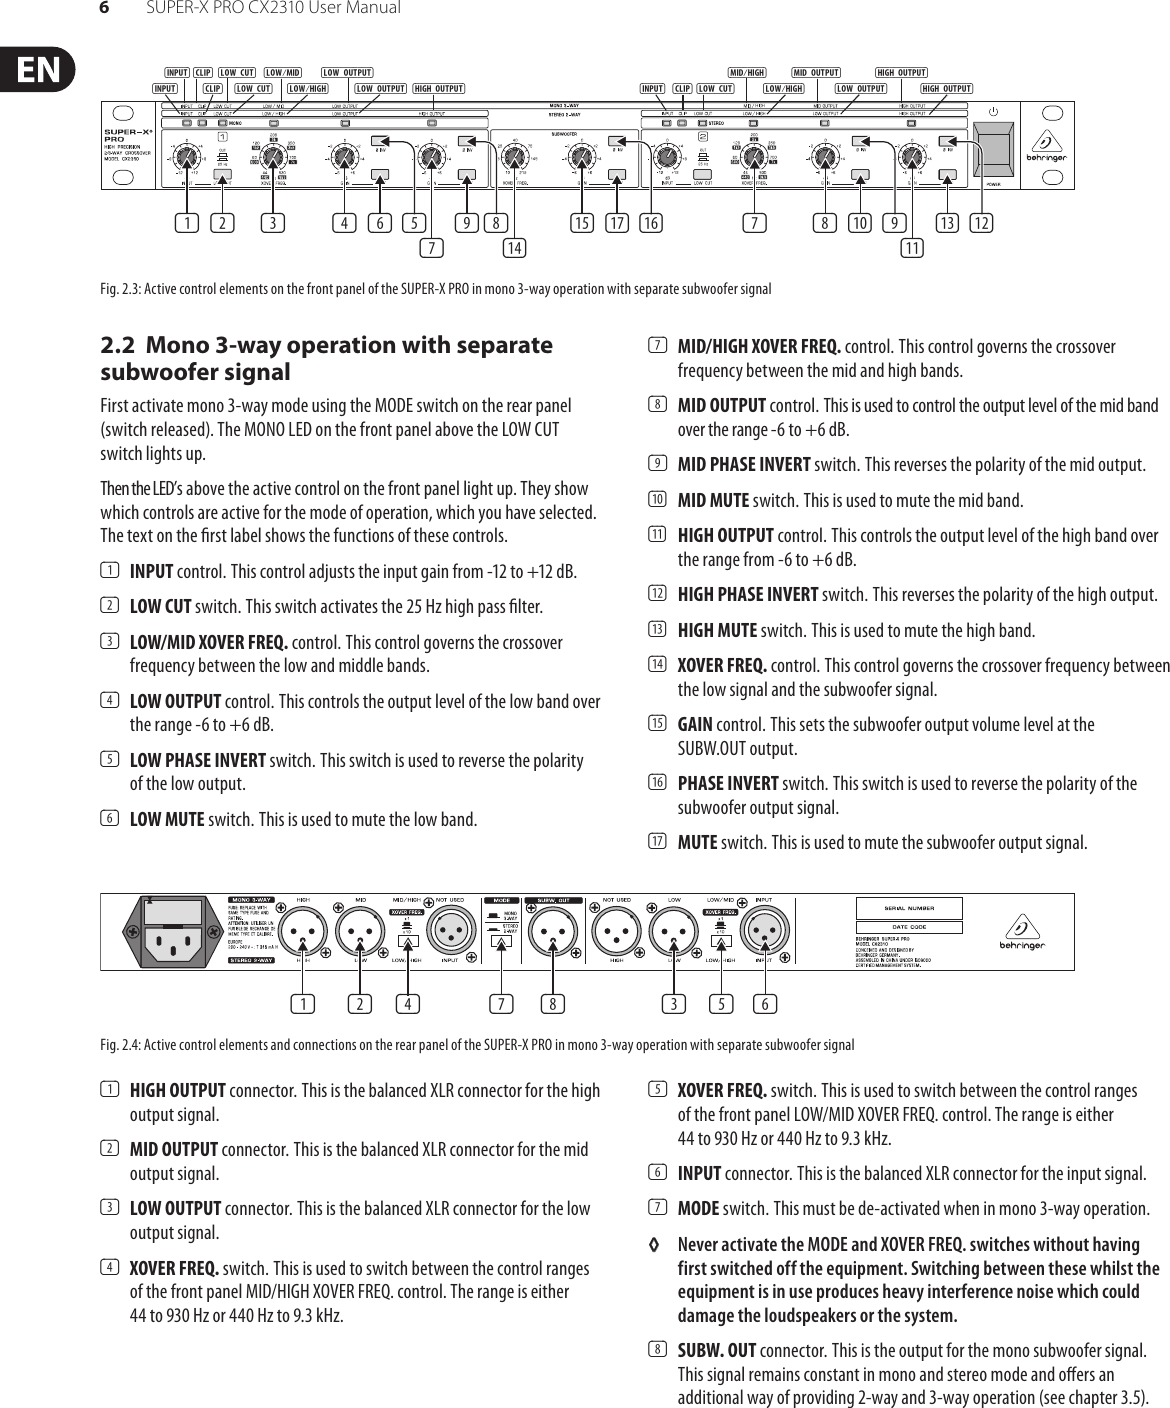 Page 6 of 10 - Behringer Behringer-Super-X-Pro-Cx2310-Users-Manual- SUPER-X PRO CX2310  Behringer-super-x-pro-cx2310-users-manual